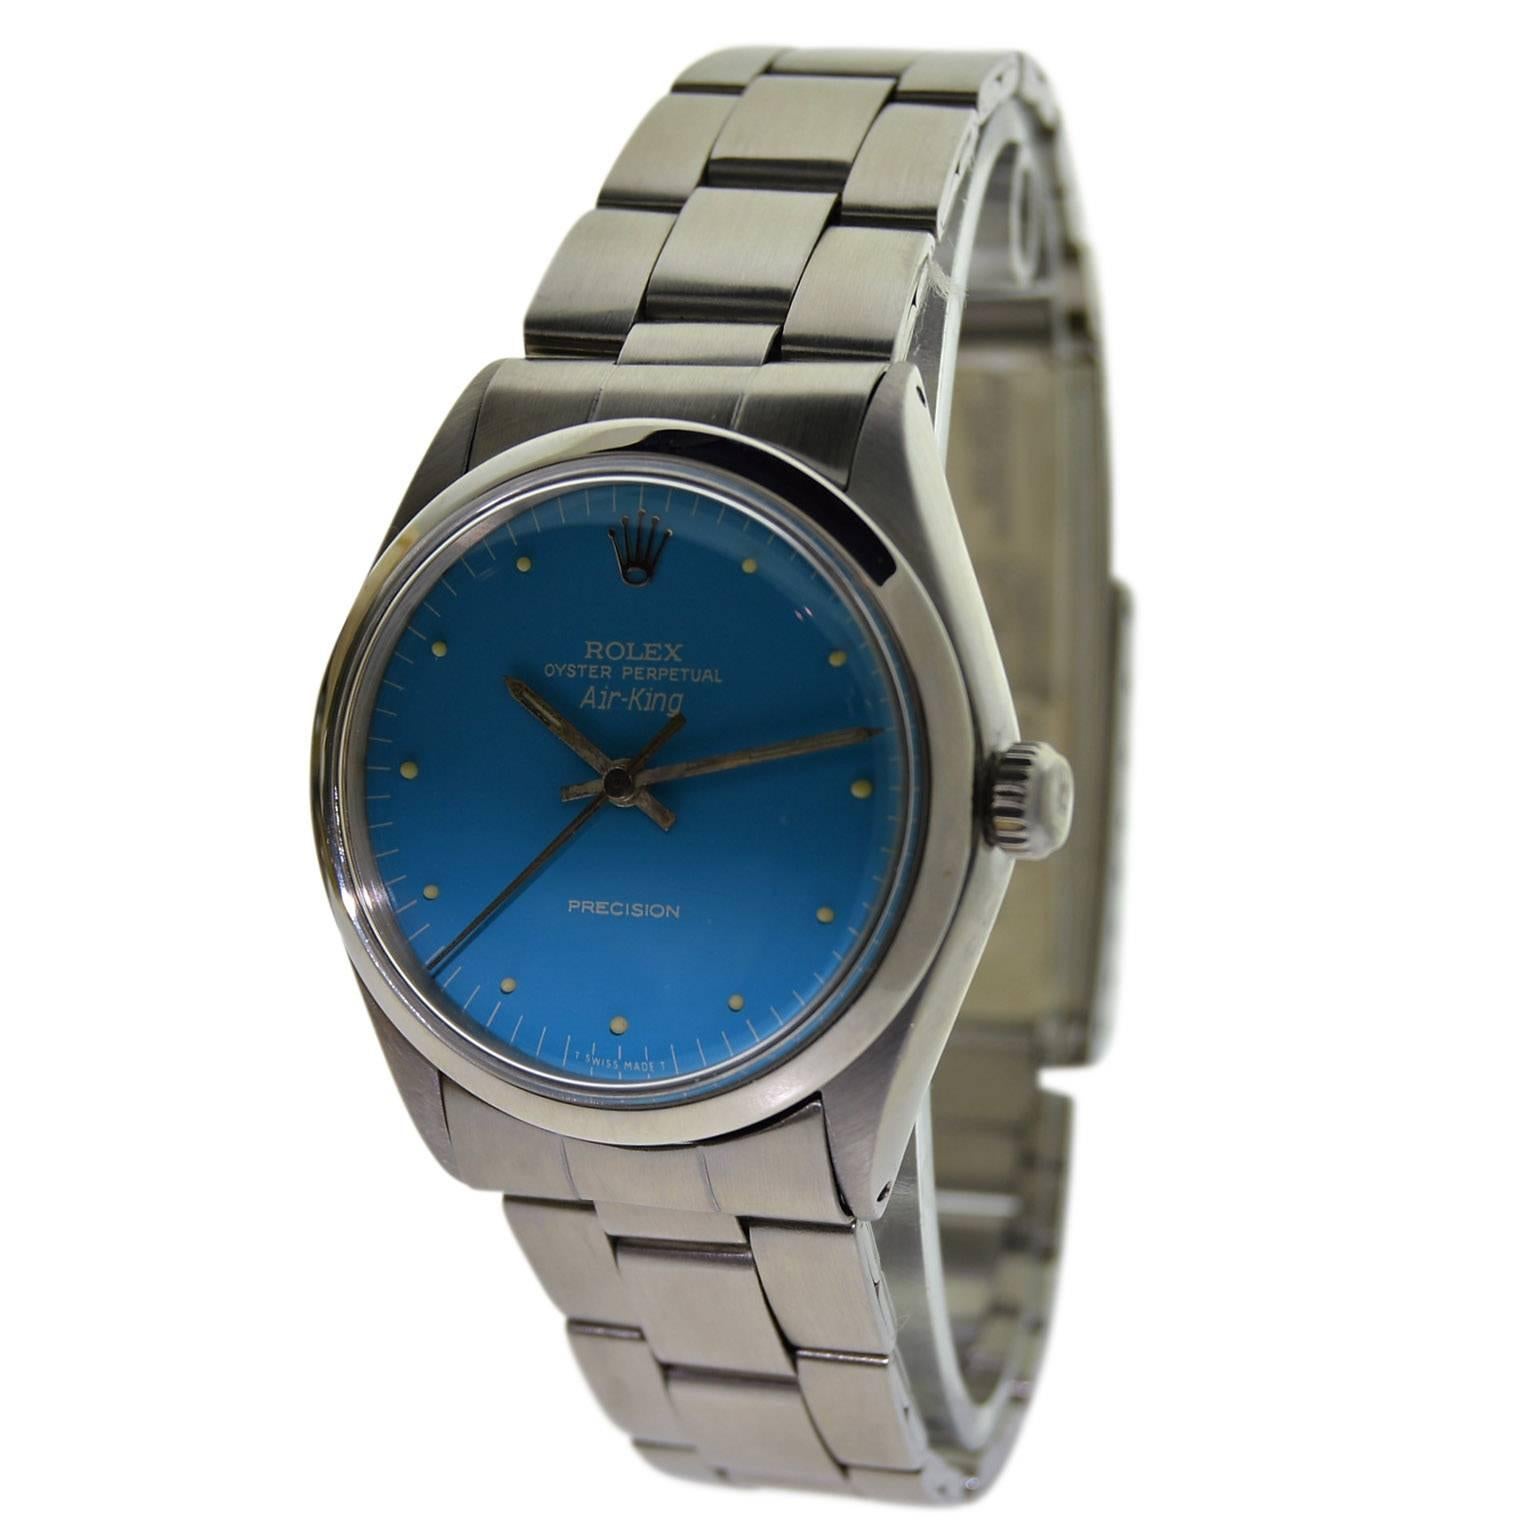 FACTORY / HOUSE: Rolex Watch Company
STYLE / REFERENCE: Air King / Ref. 5500
METAL / MATERIAL: Stainless Steel 
CIRCA: 1970's
DIMENSIONS: 39mm X 35mm
MOVEMENT / CALIBER: Perpetual Winding / 26 Jewels / Cal. 1570
DIAL / HANDS: Custom Blue Finish /